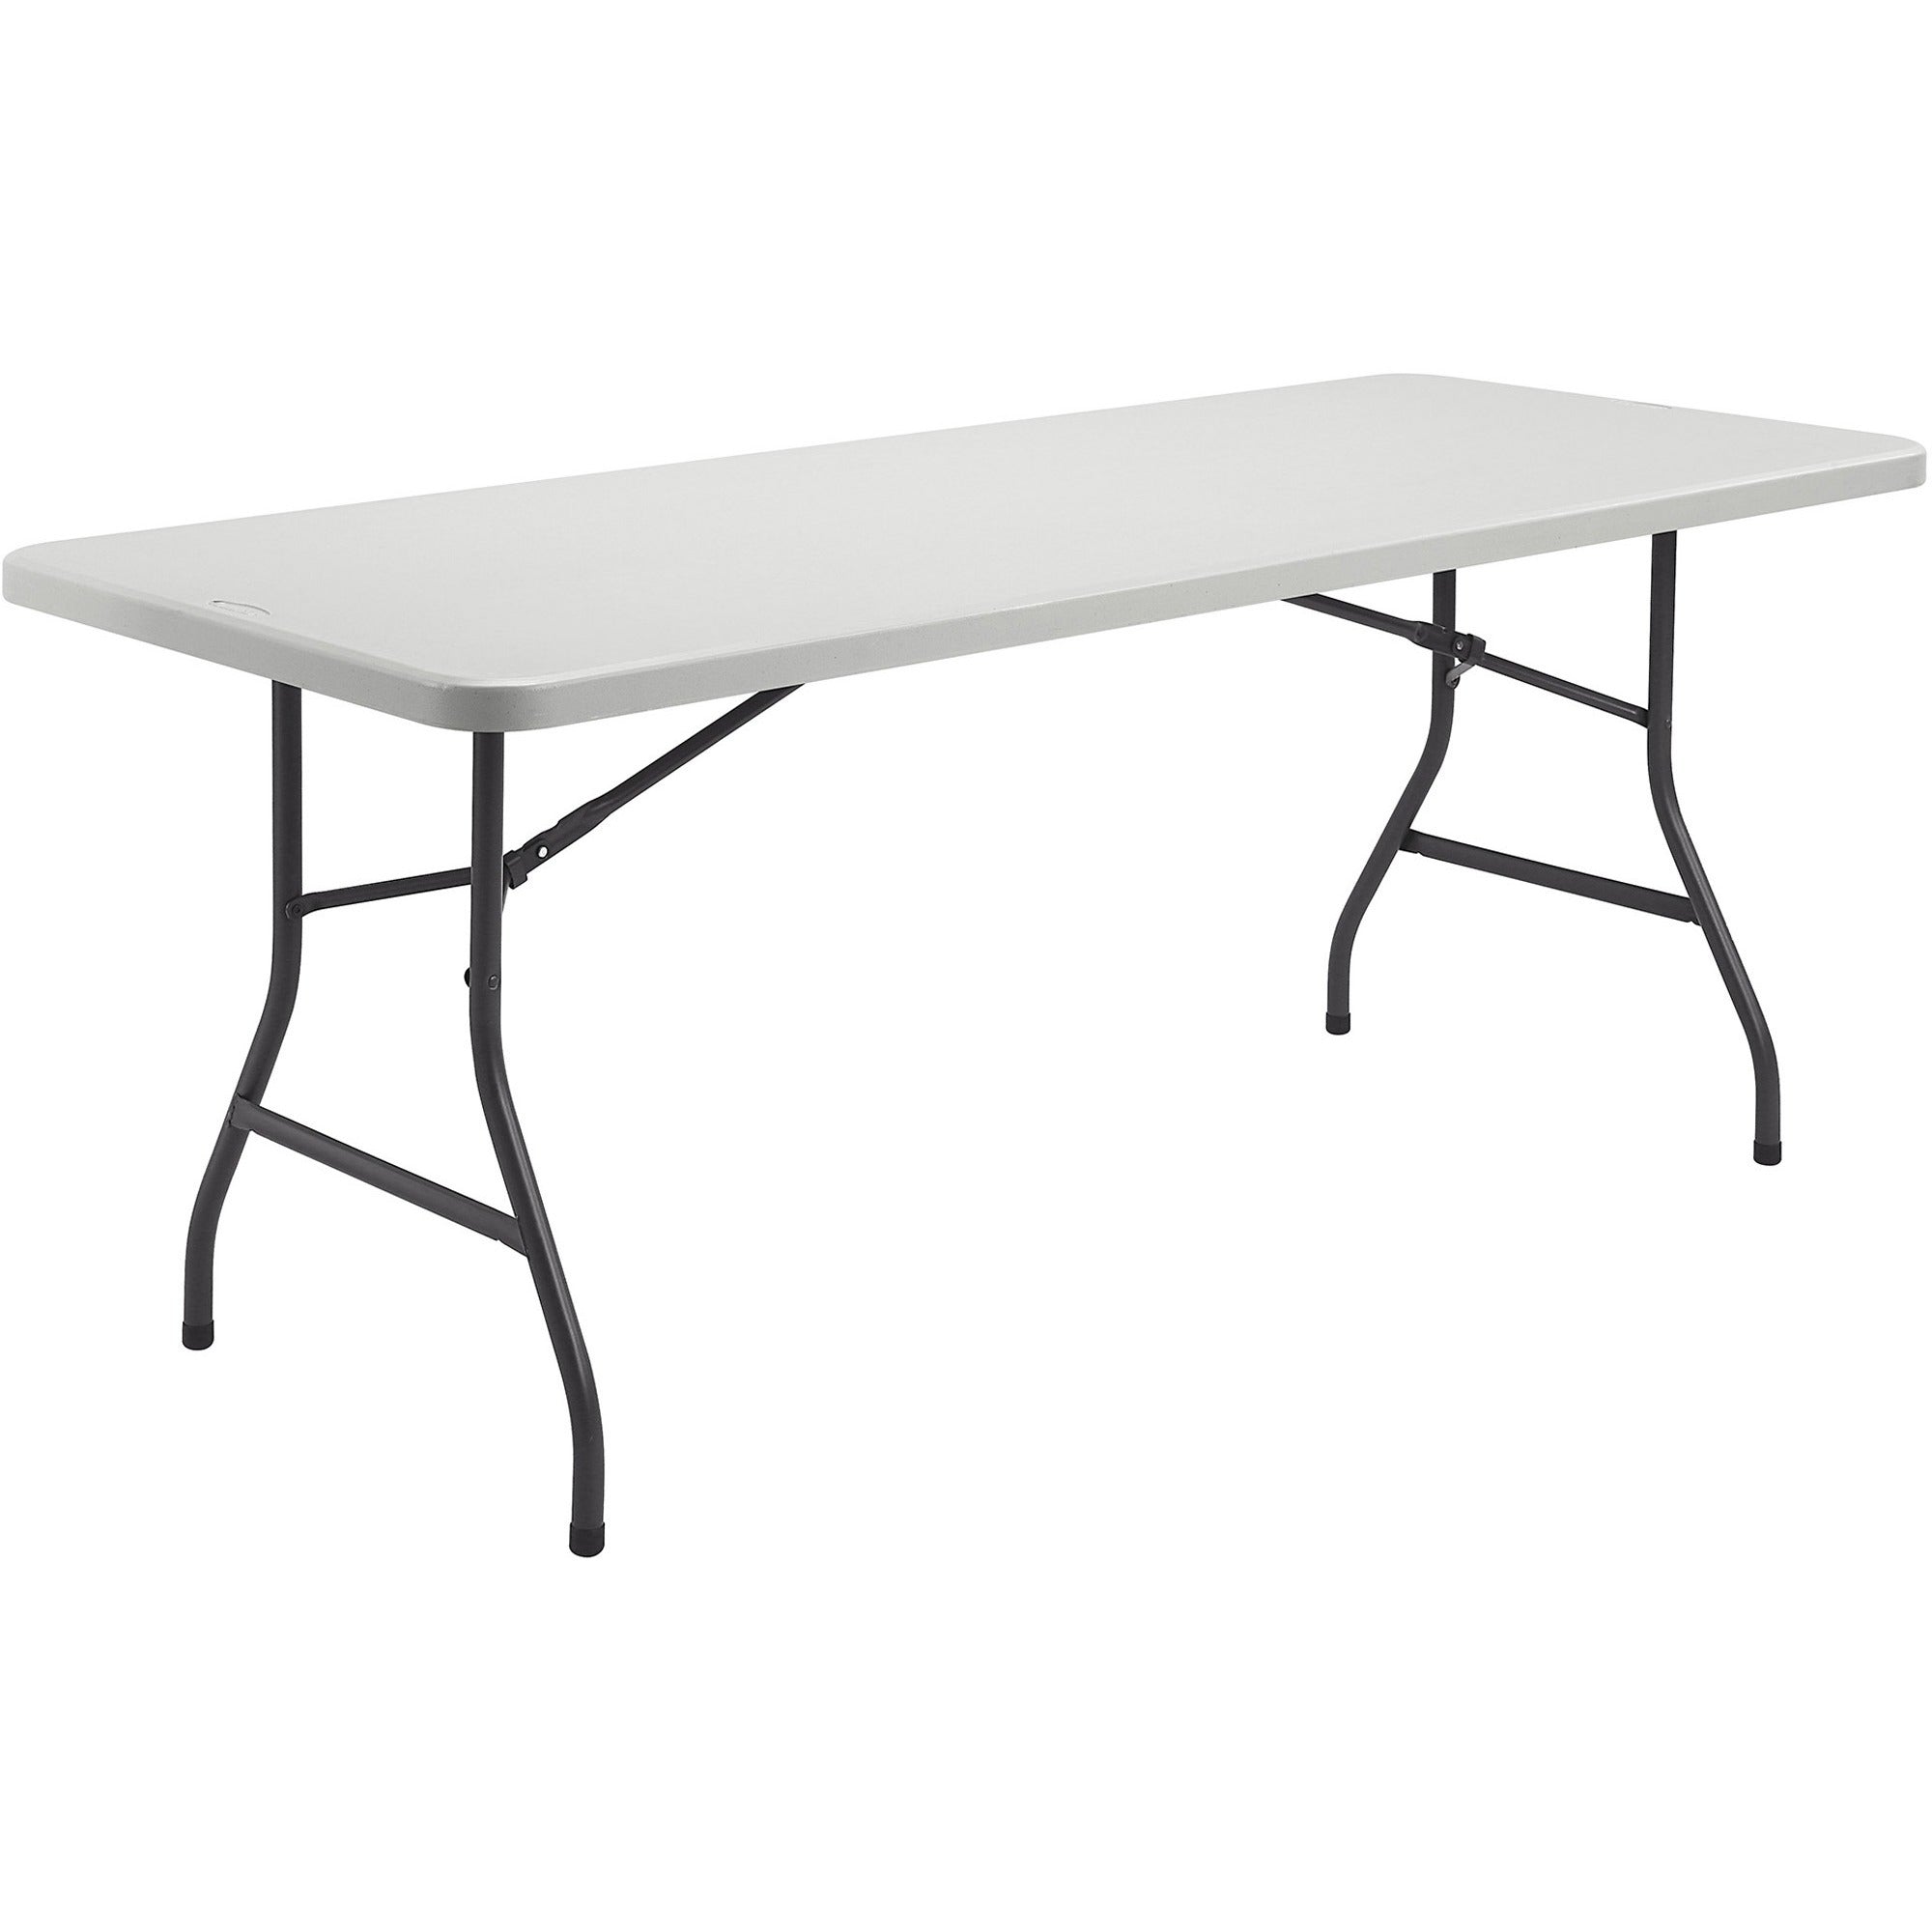 lorell-ultra-lite-banquet-table-for-table-toplight-gray-rectangle-top-dark-gray-base-600-lb-capacity-x-72-table-top-width-x-30-table-top-depth-x-2-table-top-thickness-29-height-gray-1-each_llr66655 - 4